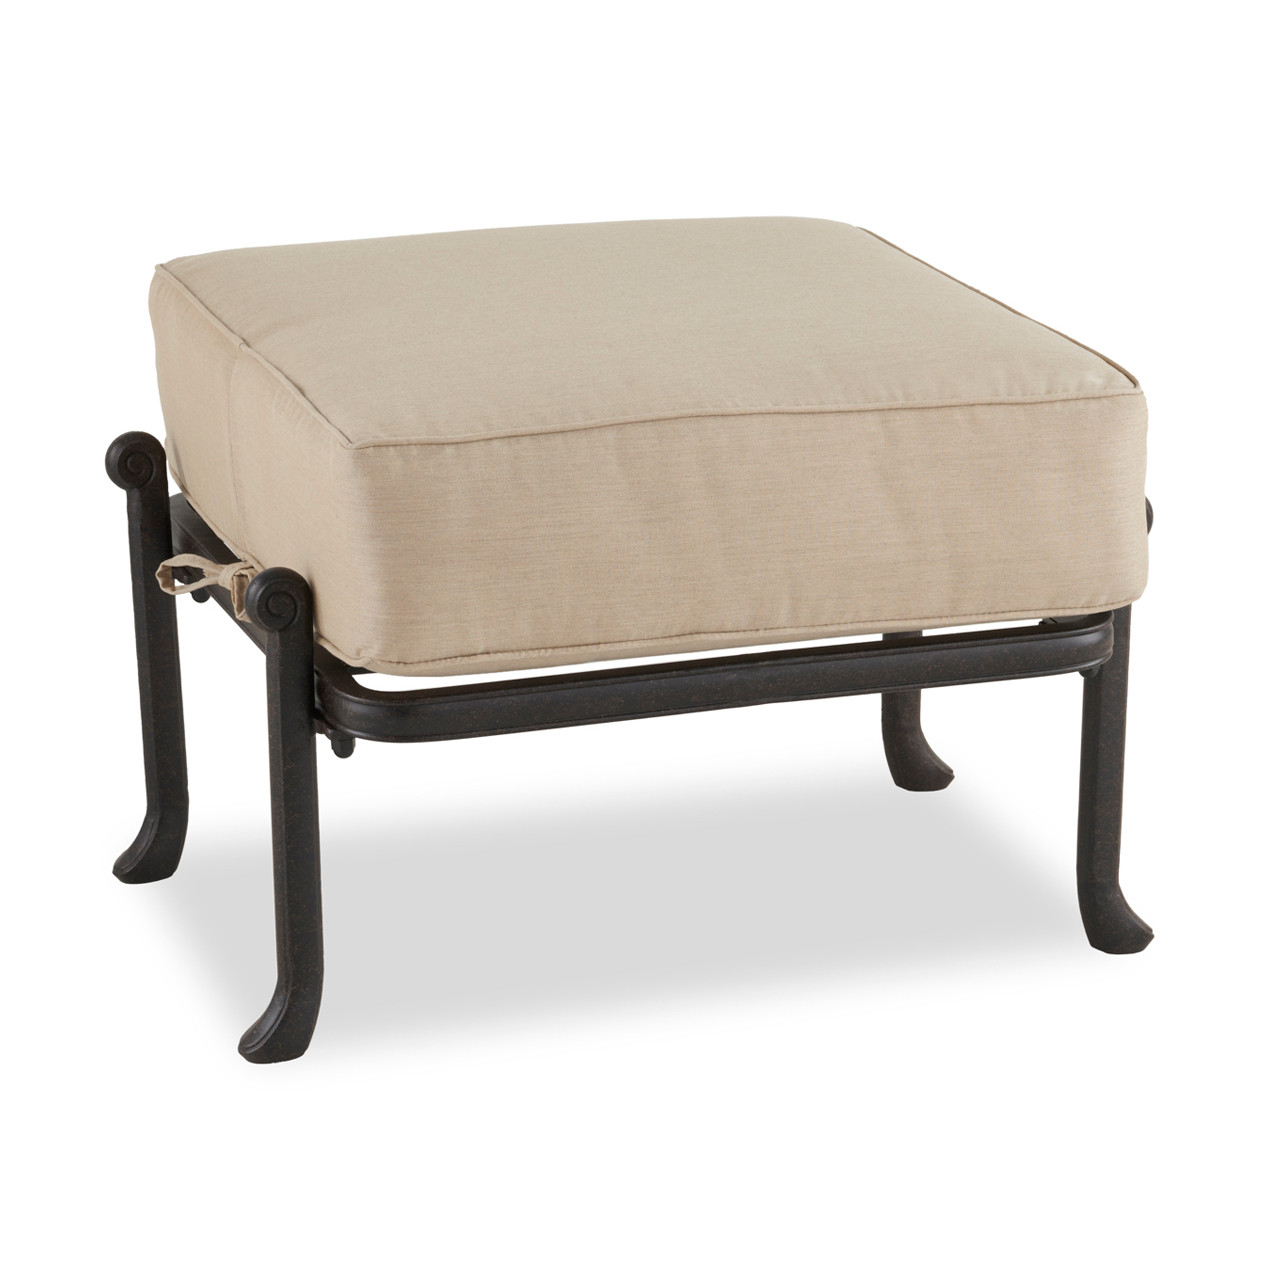 25.5 x 25.5 in. Remy Linen Outdura Self-Welt Estate Club Ottoman Cushion (Frame Sold Separately)